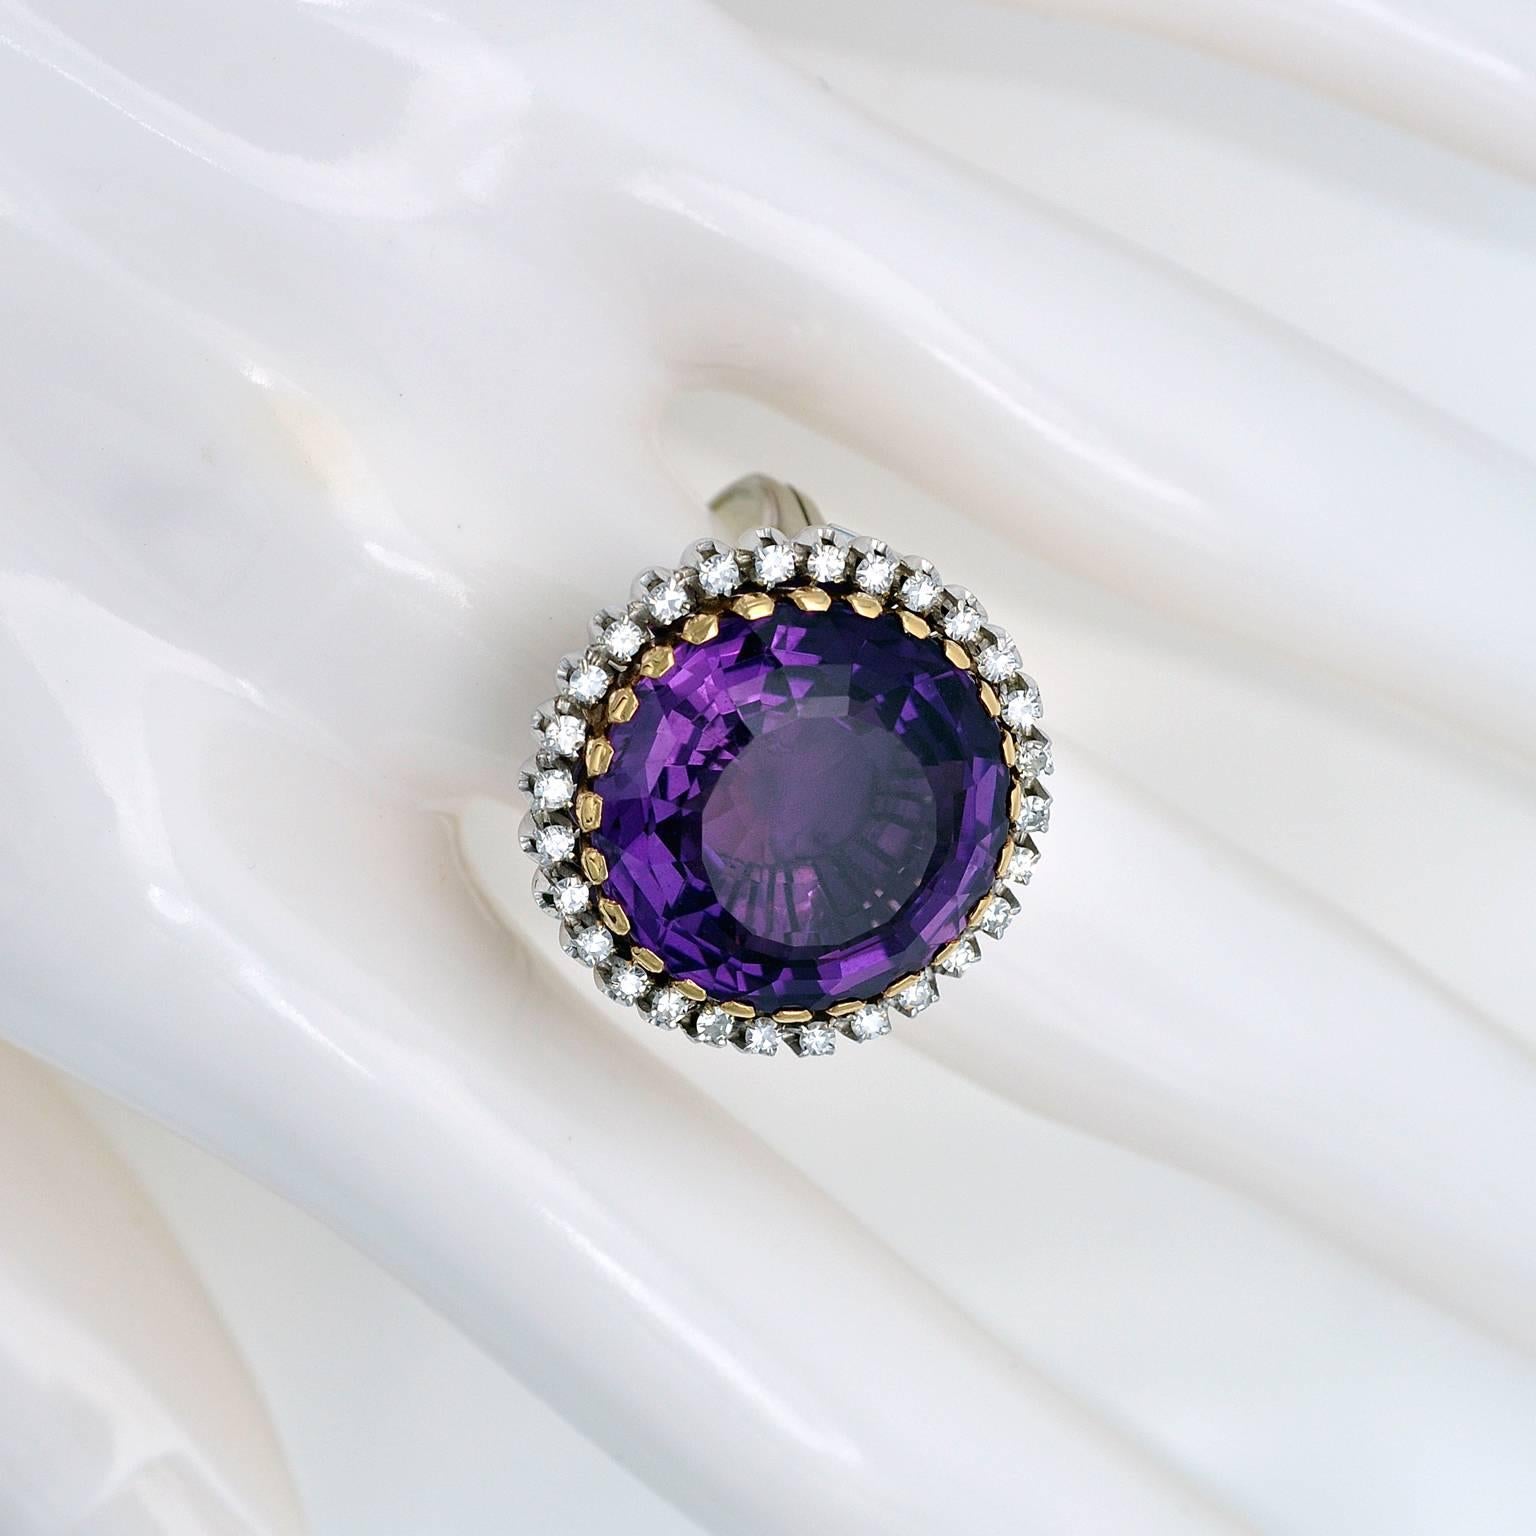 A Round 17mm (0.7in) amethyst set in yellow gold in An exquisite white gold halo Cocktail Ring. the center stone is surrounded by 28 round diamonds. The geometrical pattern of the ring is made with incredible perfection.

Ring Diameter : 2.2 cm /